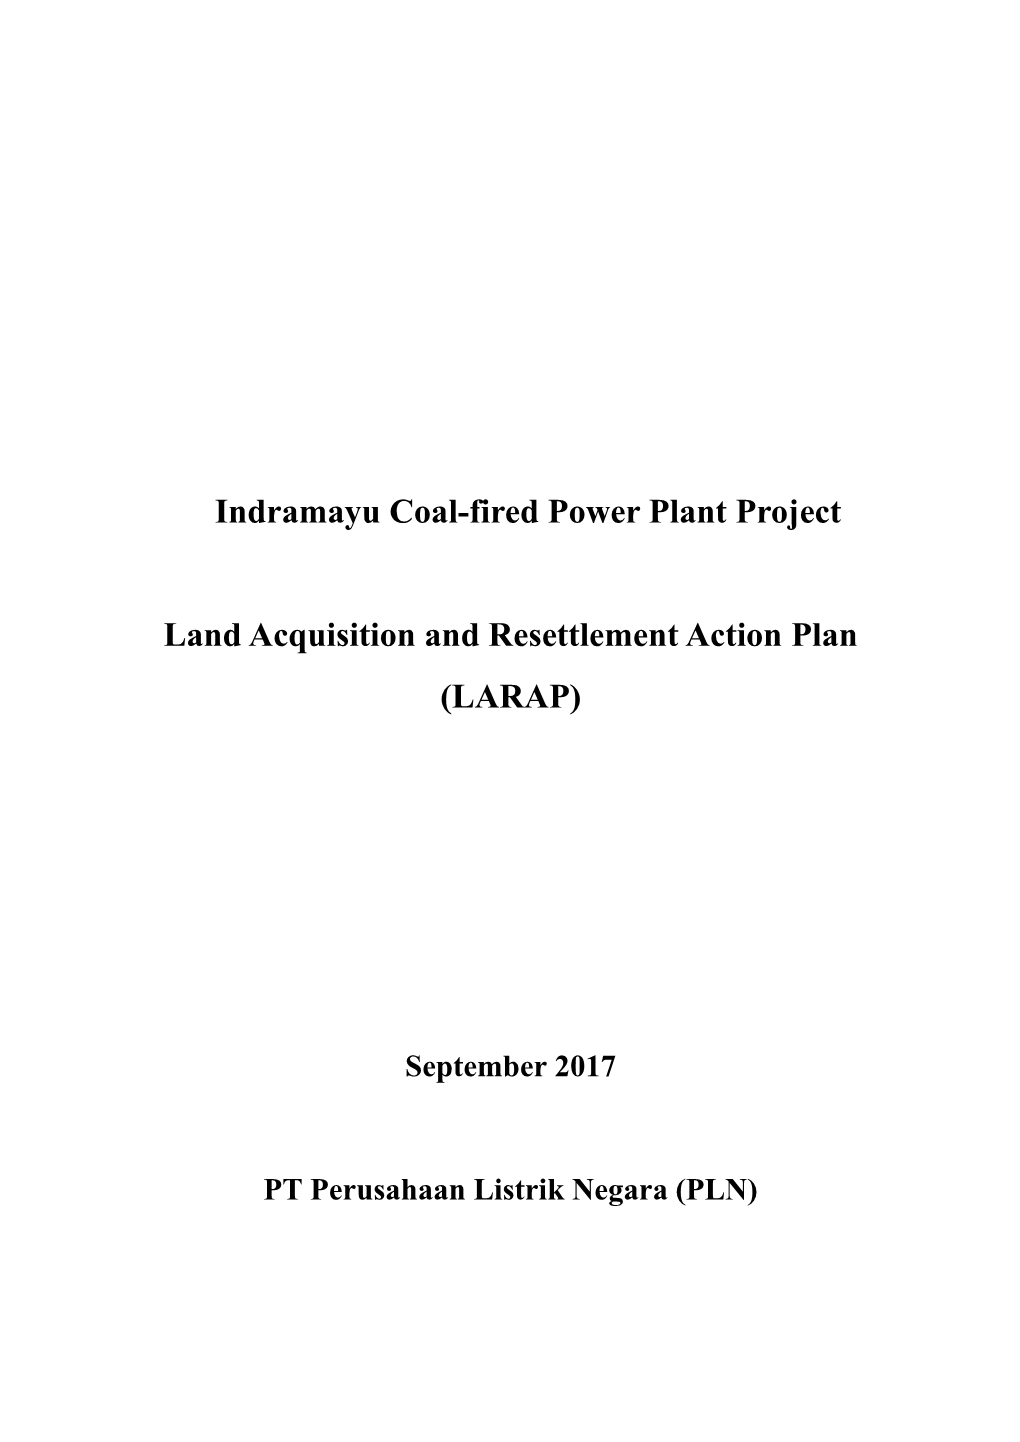 Indramayu Coal-Fired Power Plant Project Land Acquisition And